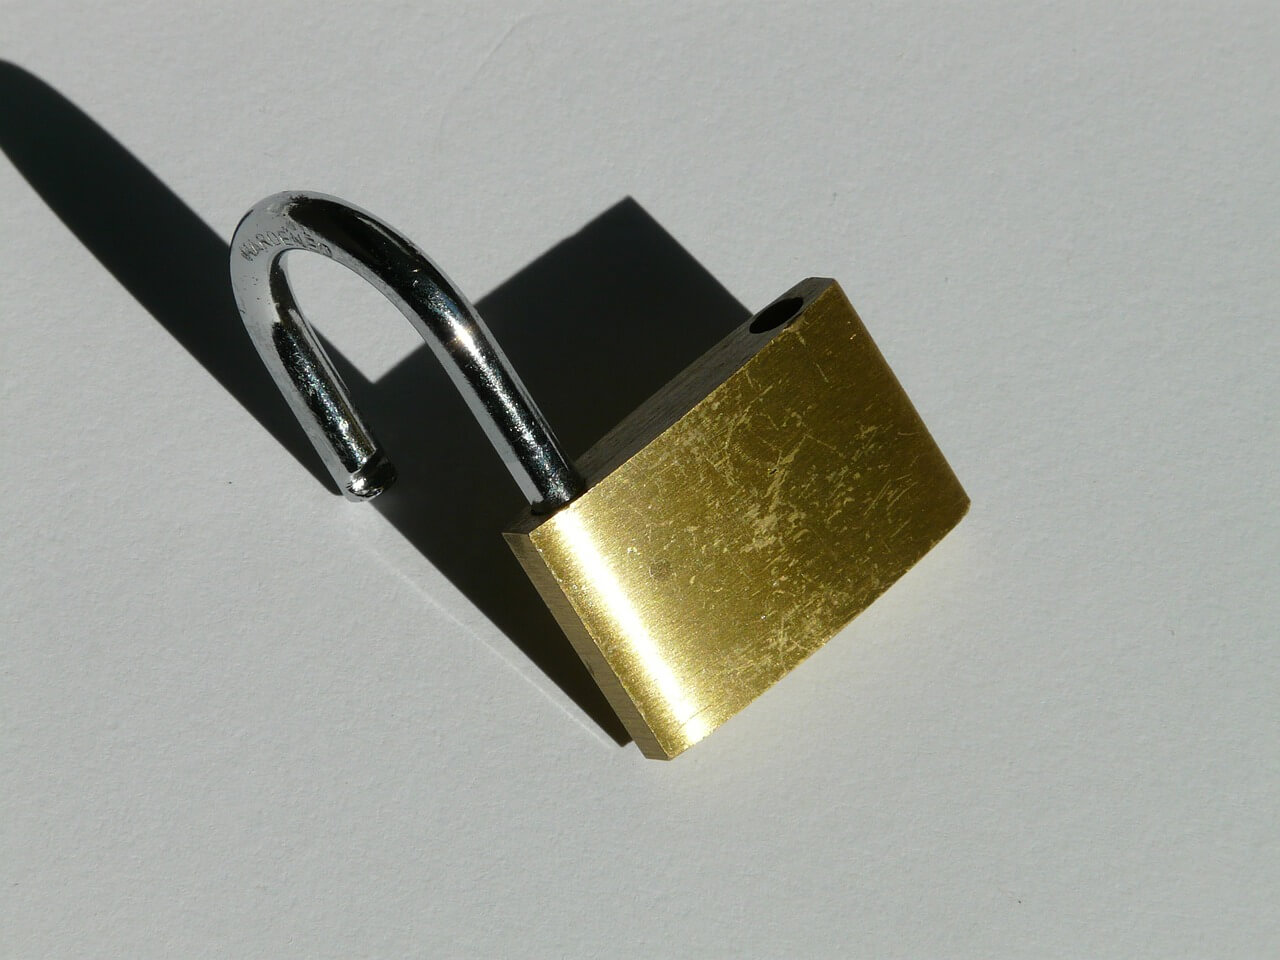 Padlock to use on a locker, Spain packing list